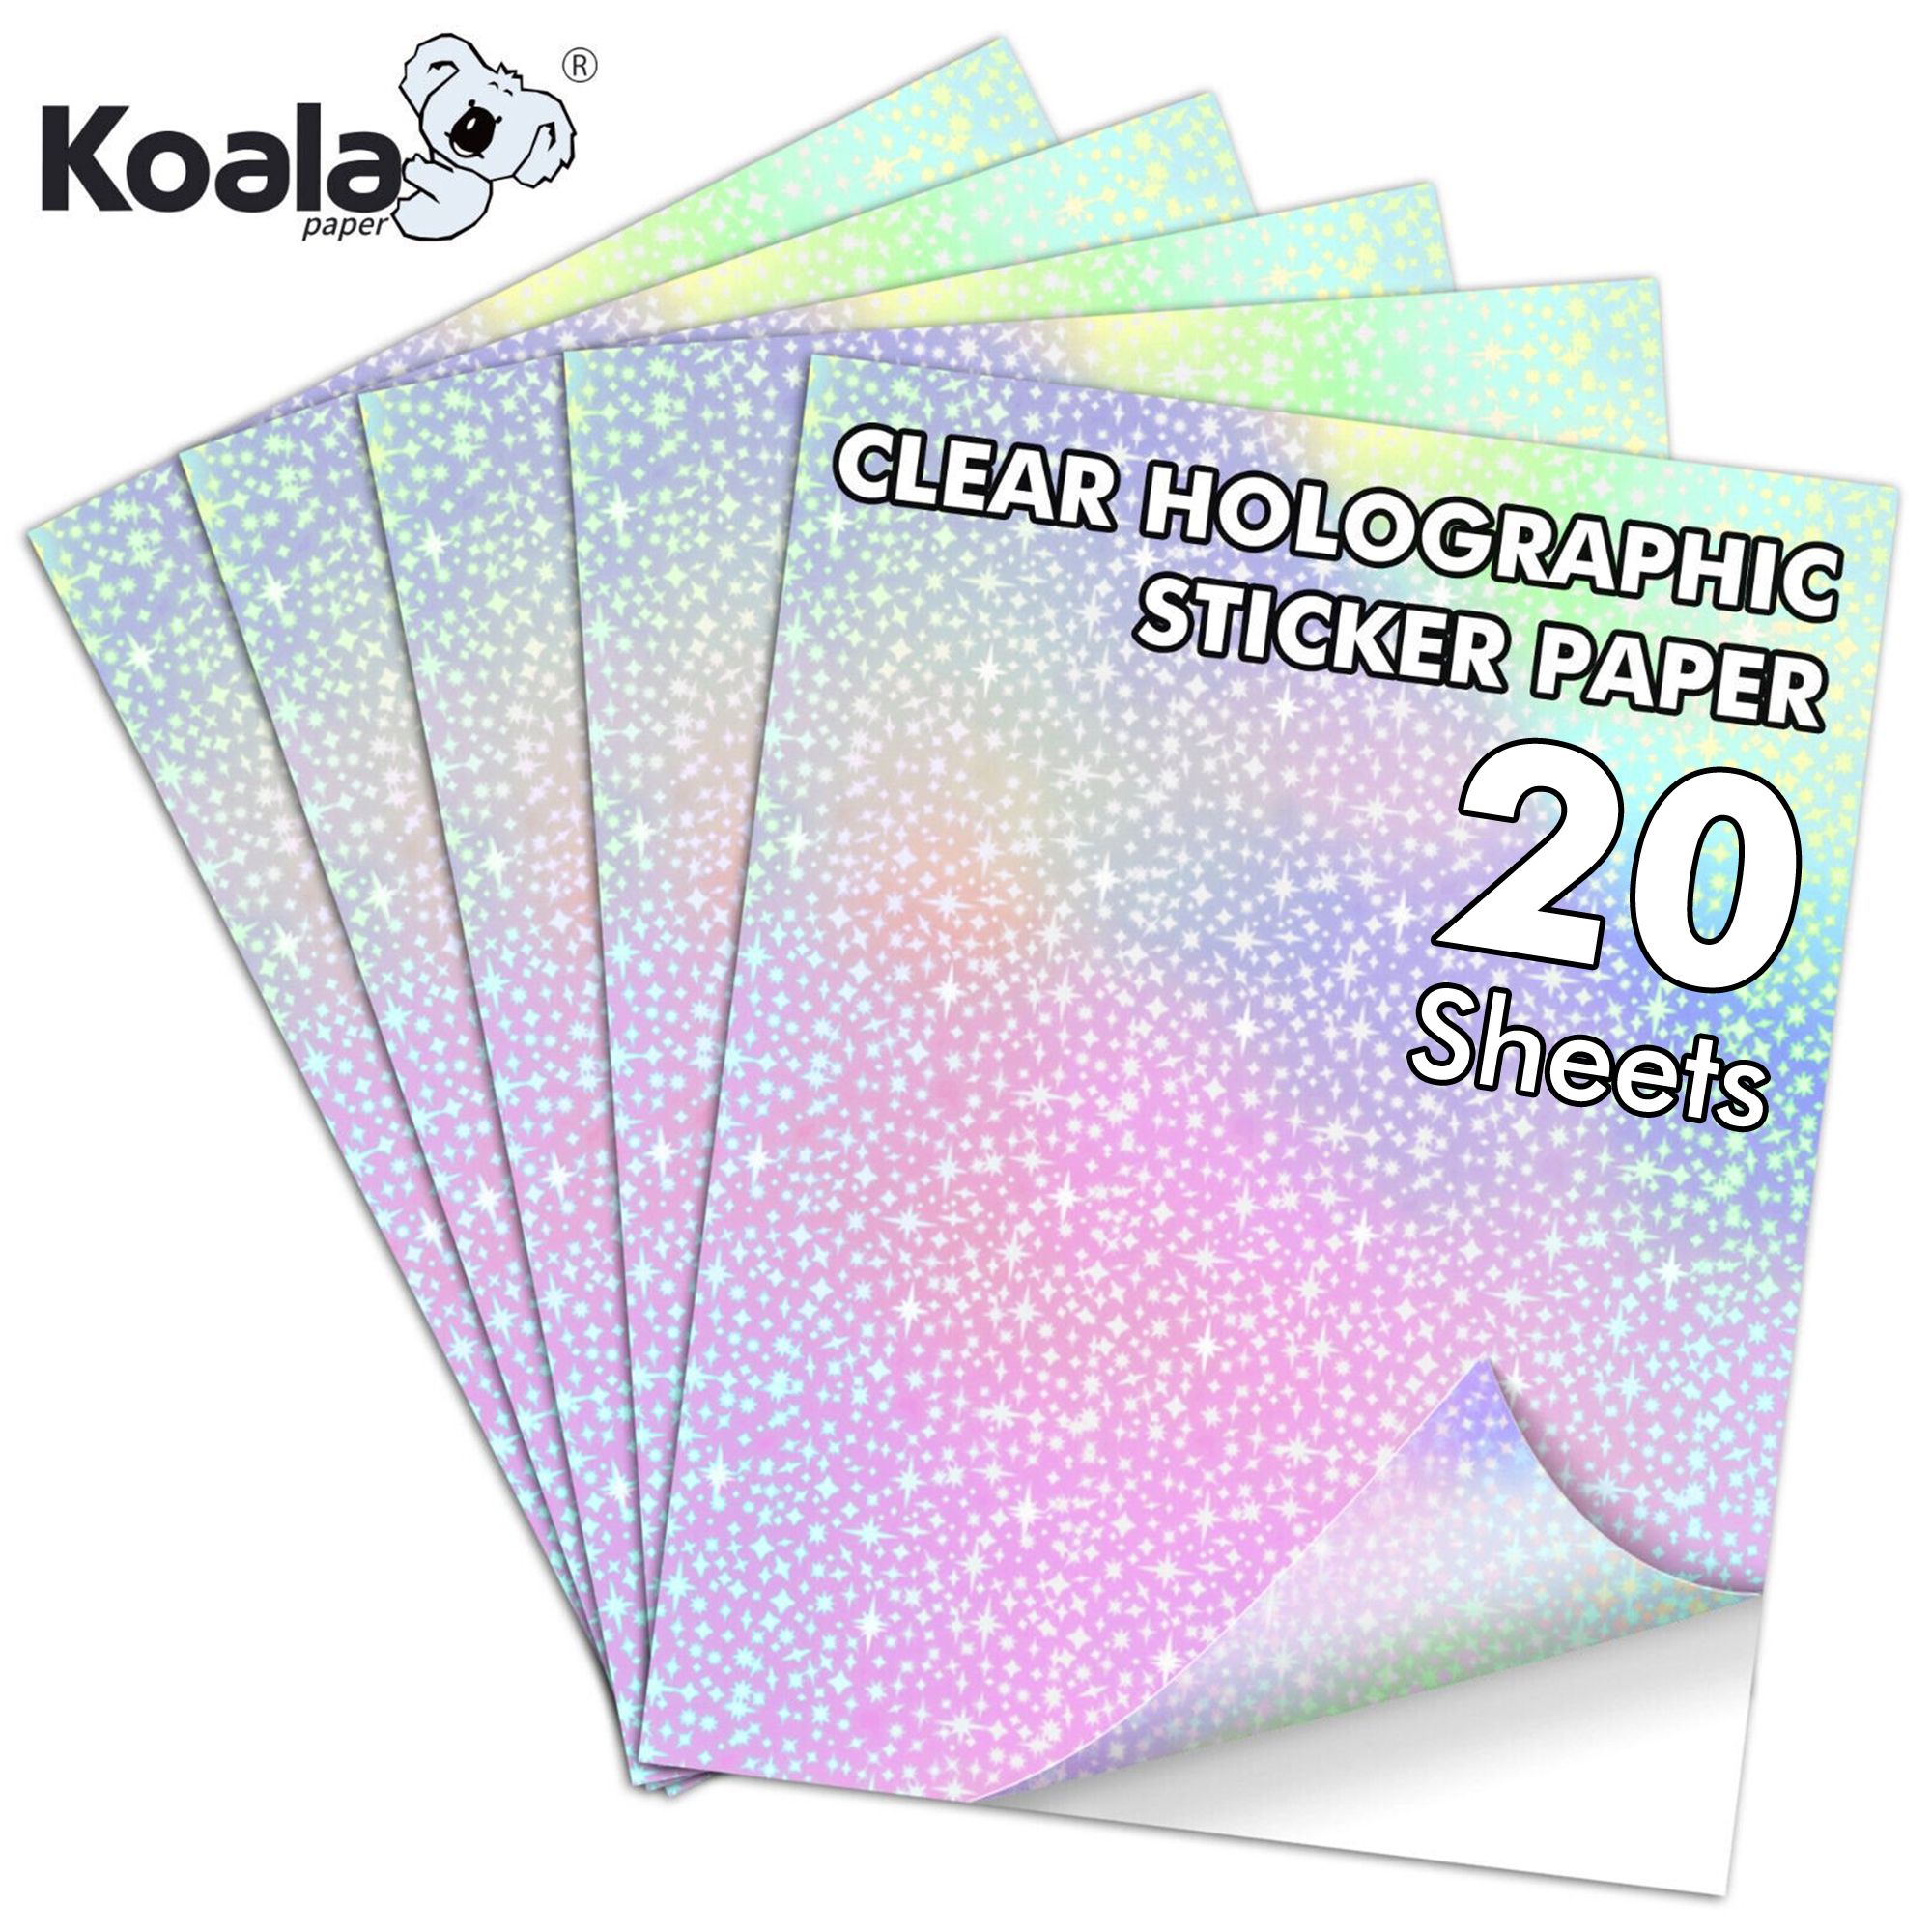 20 Sheets Koala Clear Holographic Sticker Paper Star, Self-Adhesive Laminating Sheets Clear, Transparent Vinyl Overlay Film A4